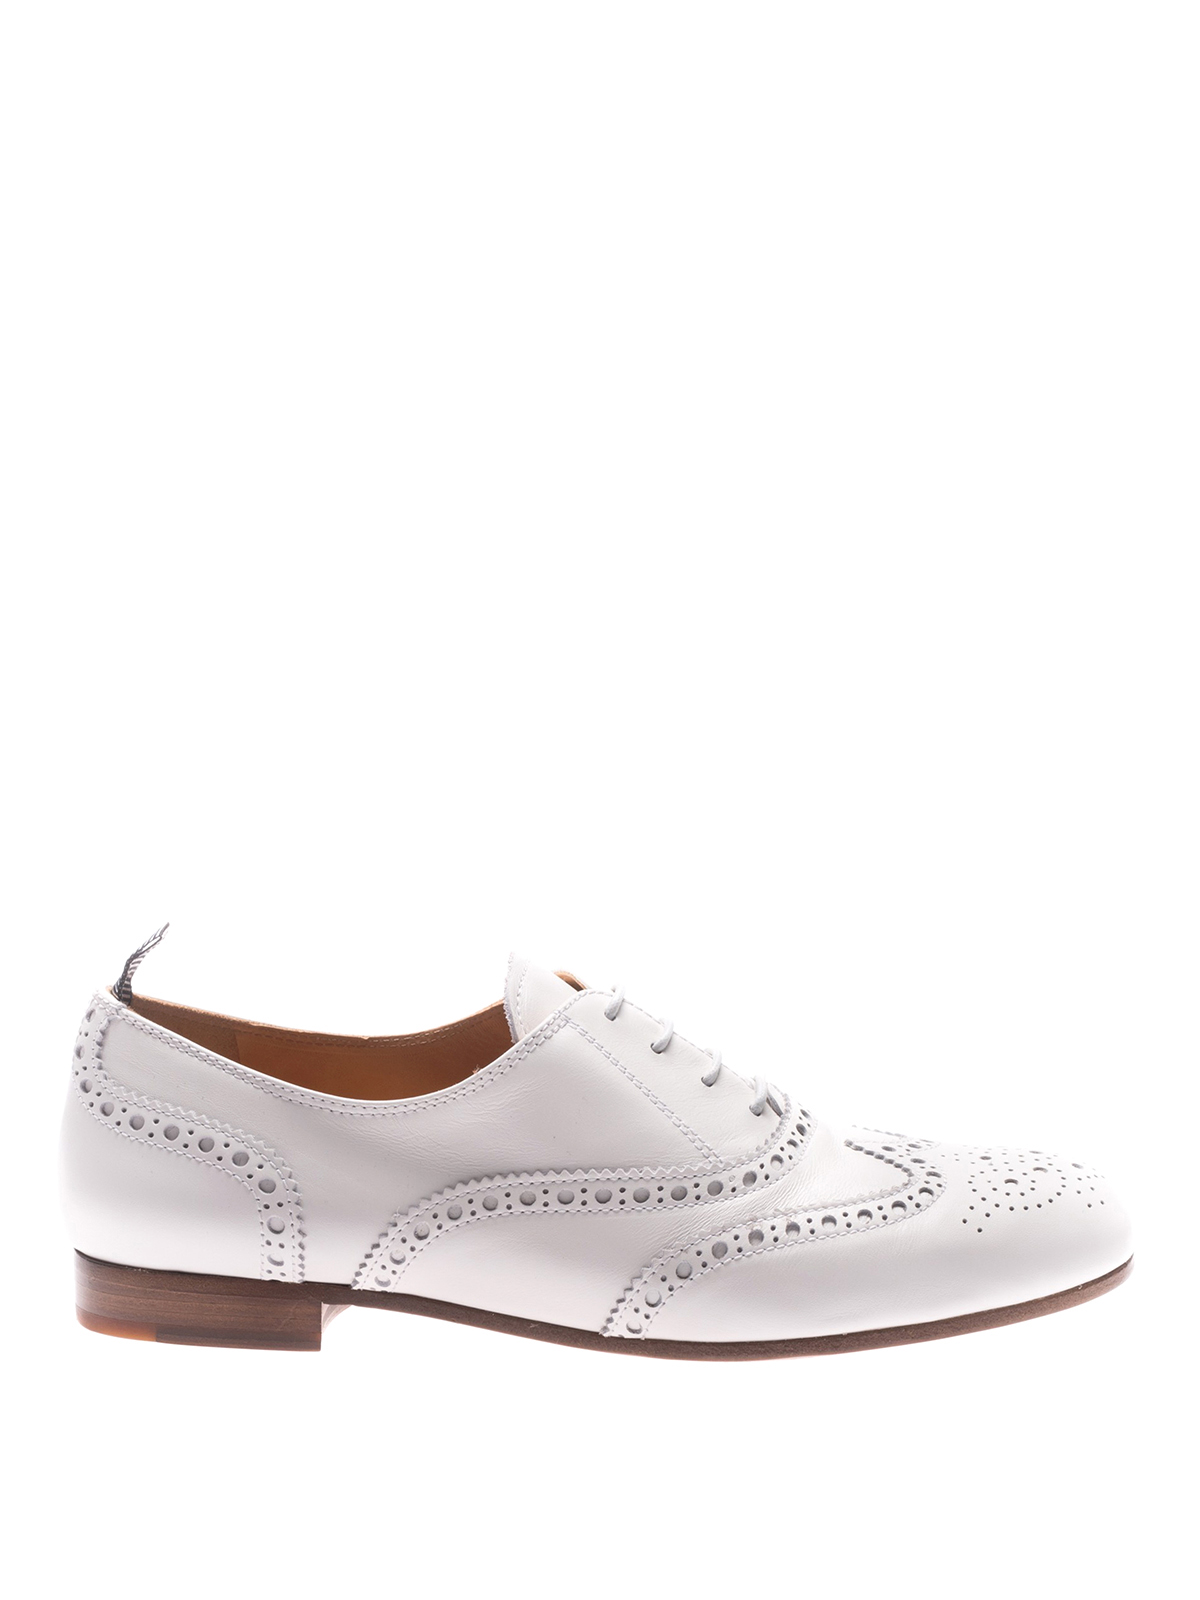 Lace-ups shoes Church's - White leather Oxford brogues - DE01139AEWF0ABK